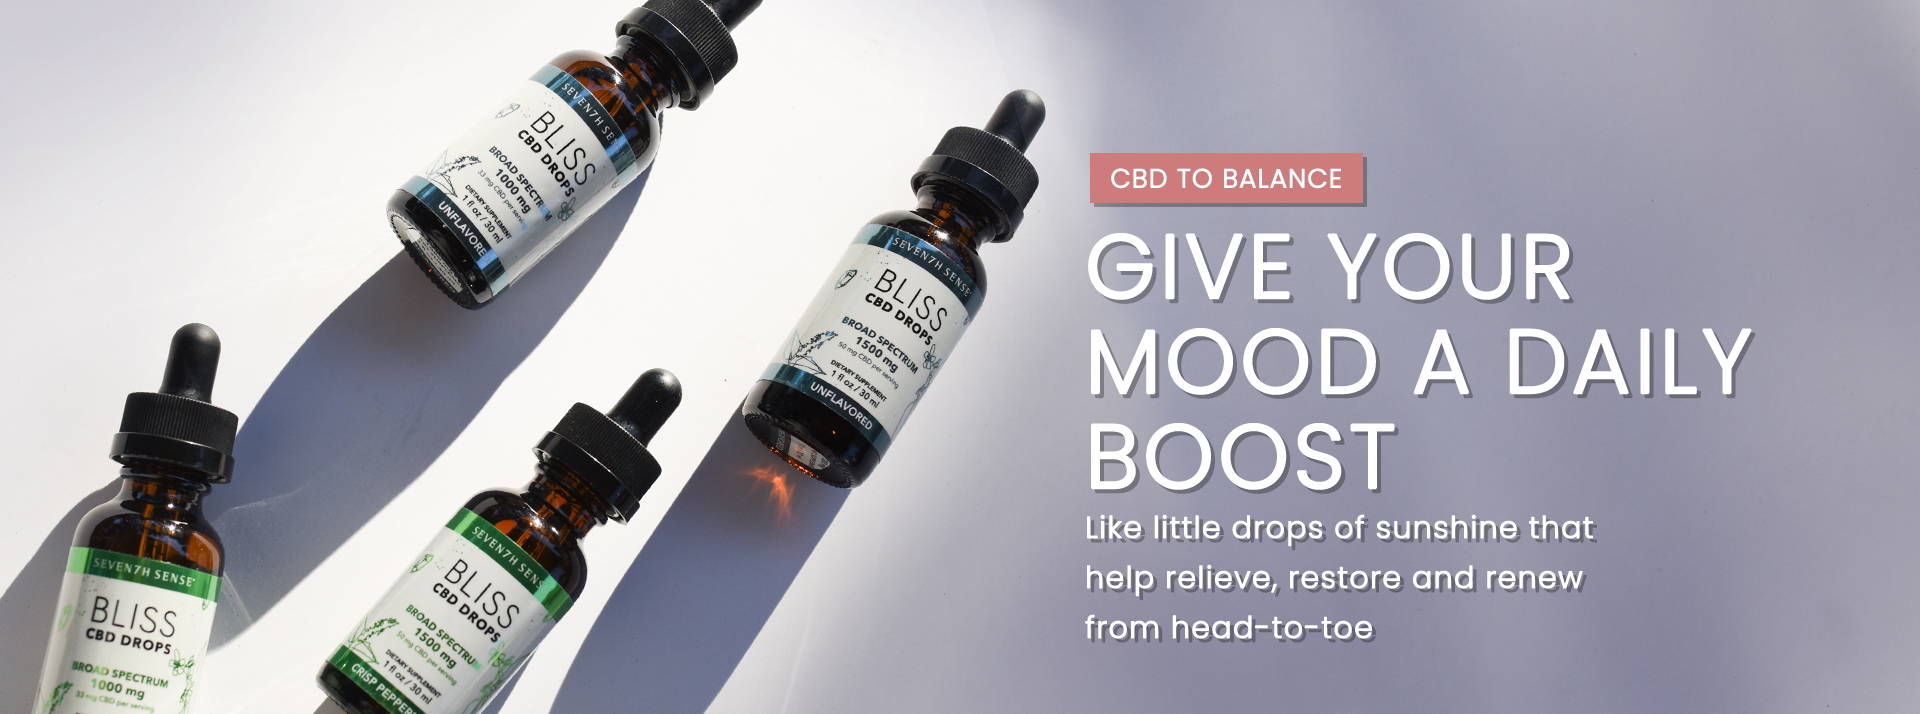 Give your mood a daily boost